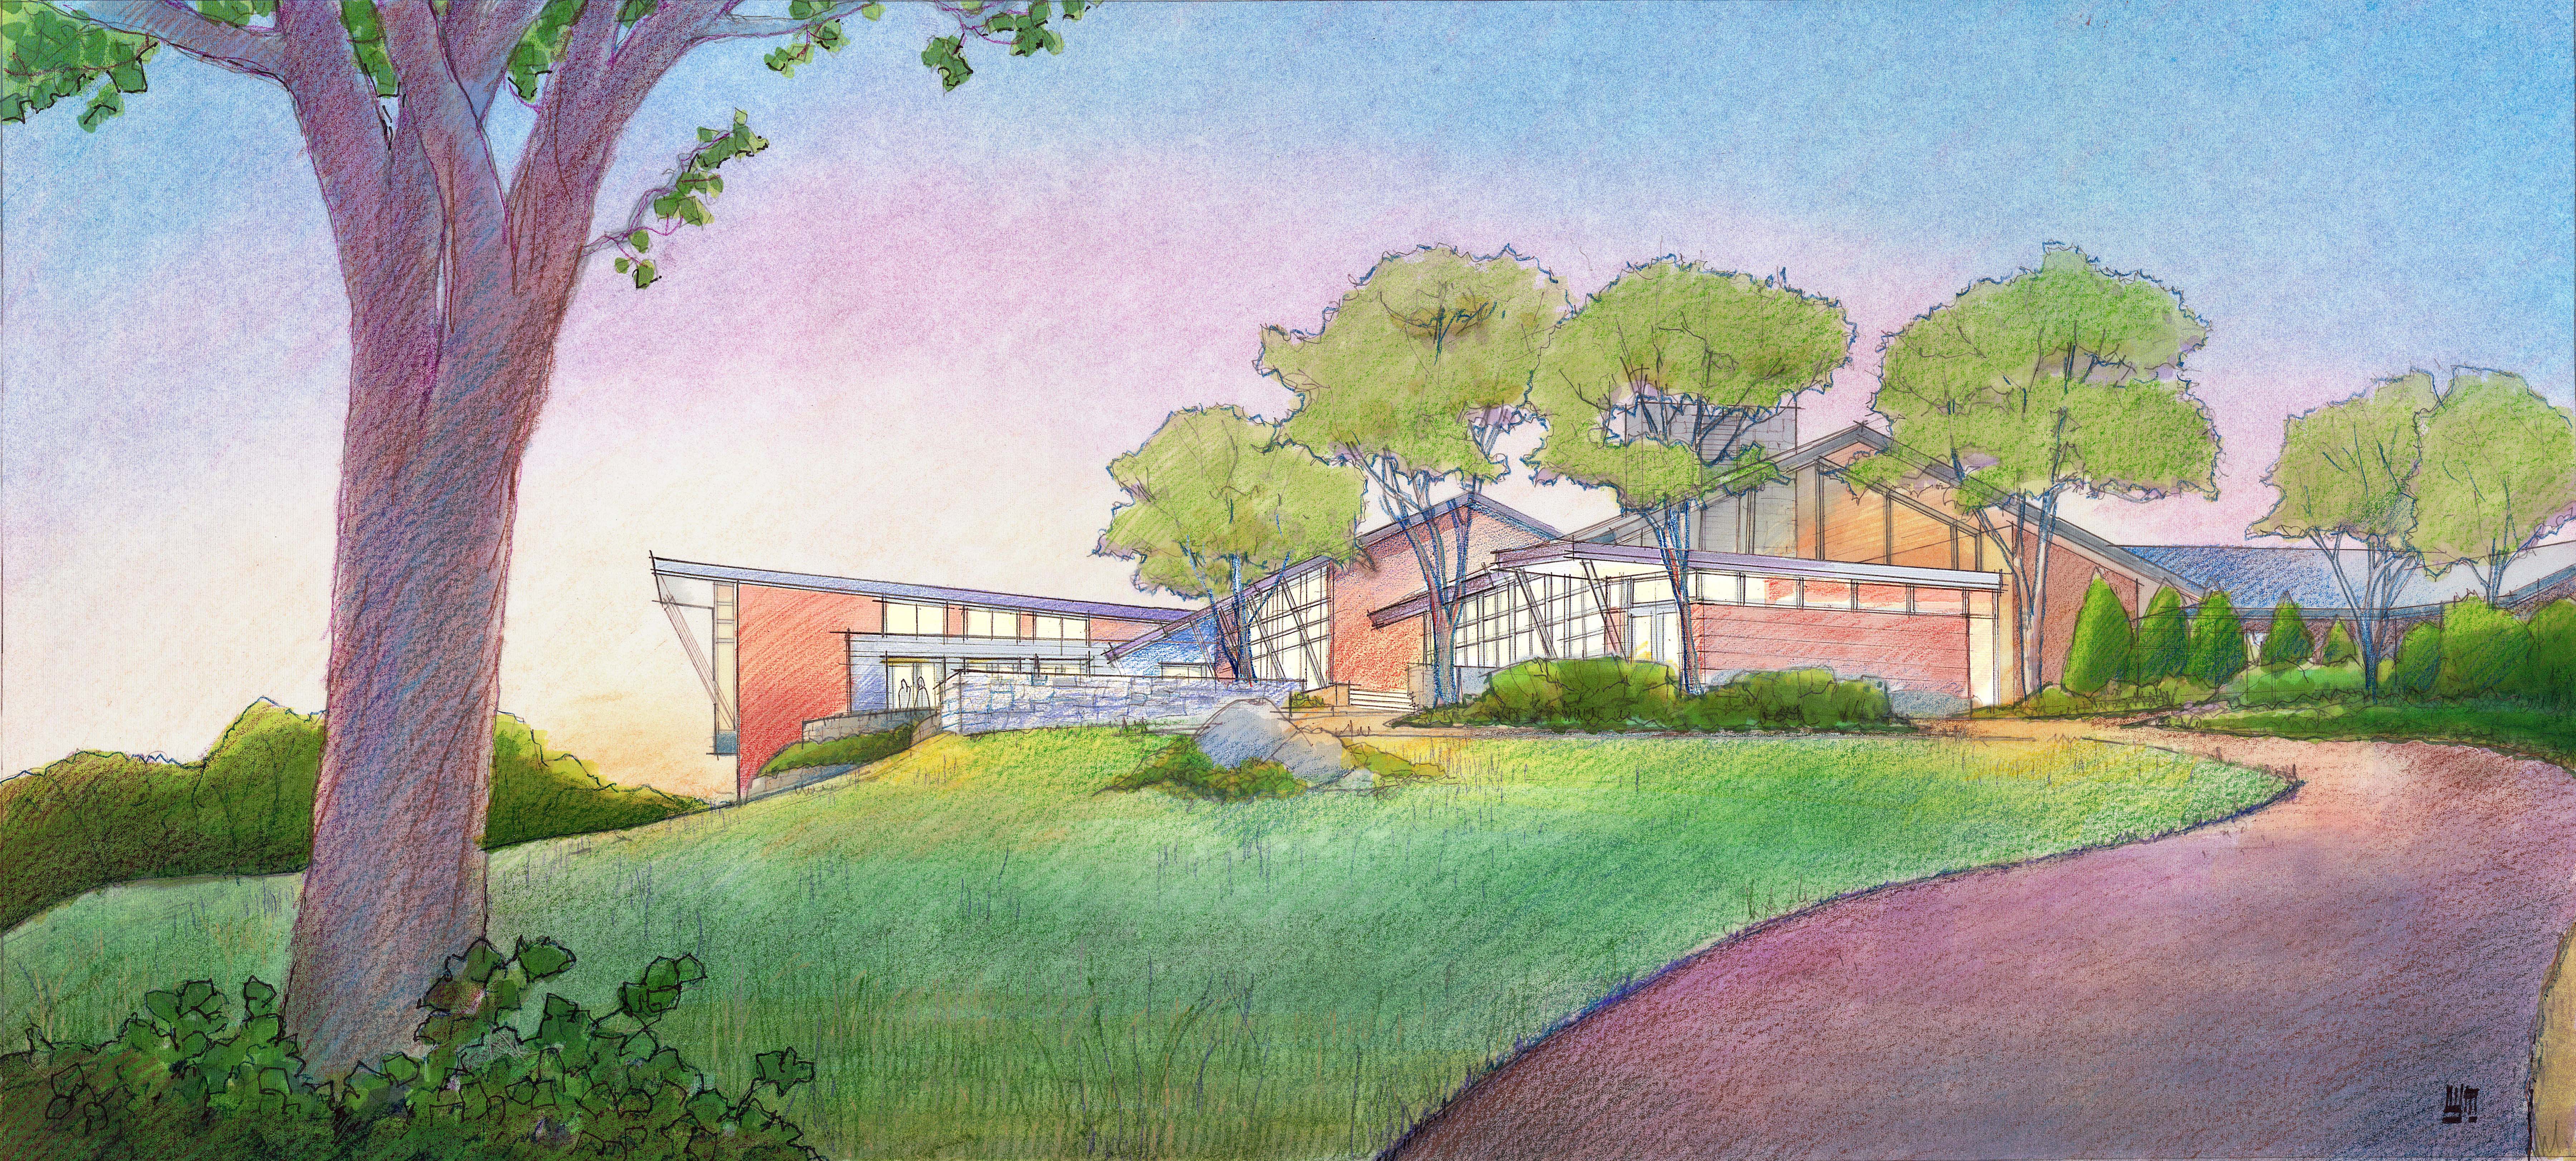 Ground Breaking: Holy Cross Contemplative Center